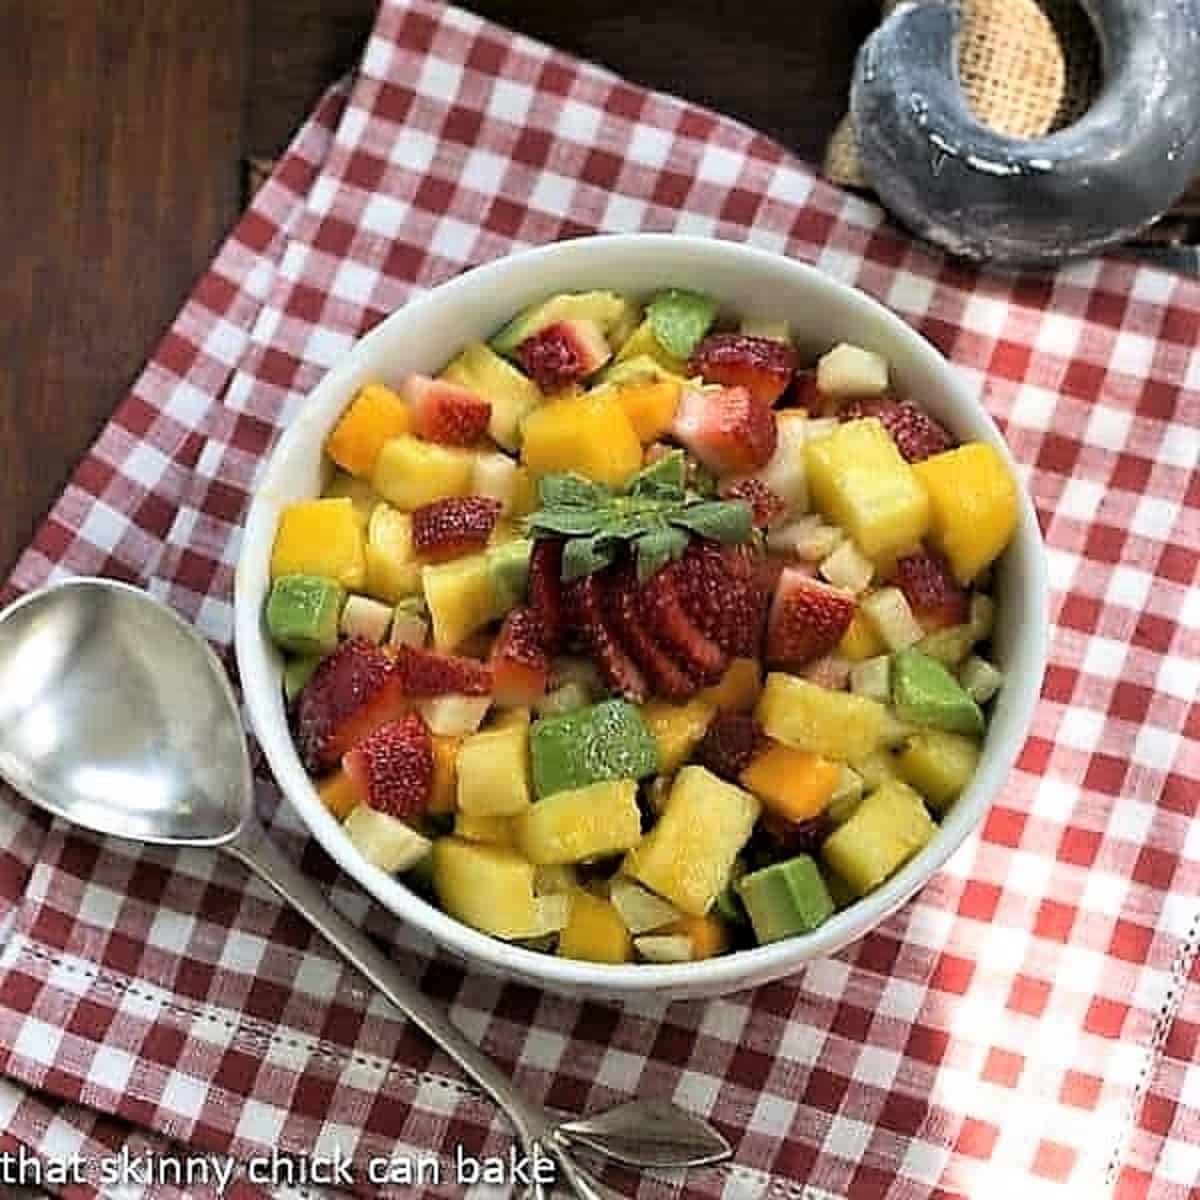 Mango Strawberry Avocado Salad in a white bowl on a red and white checked napkin.